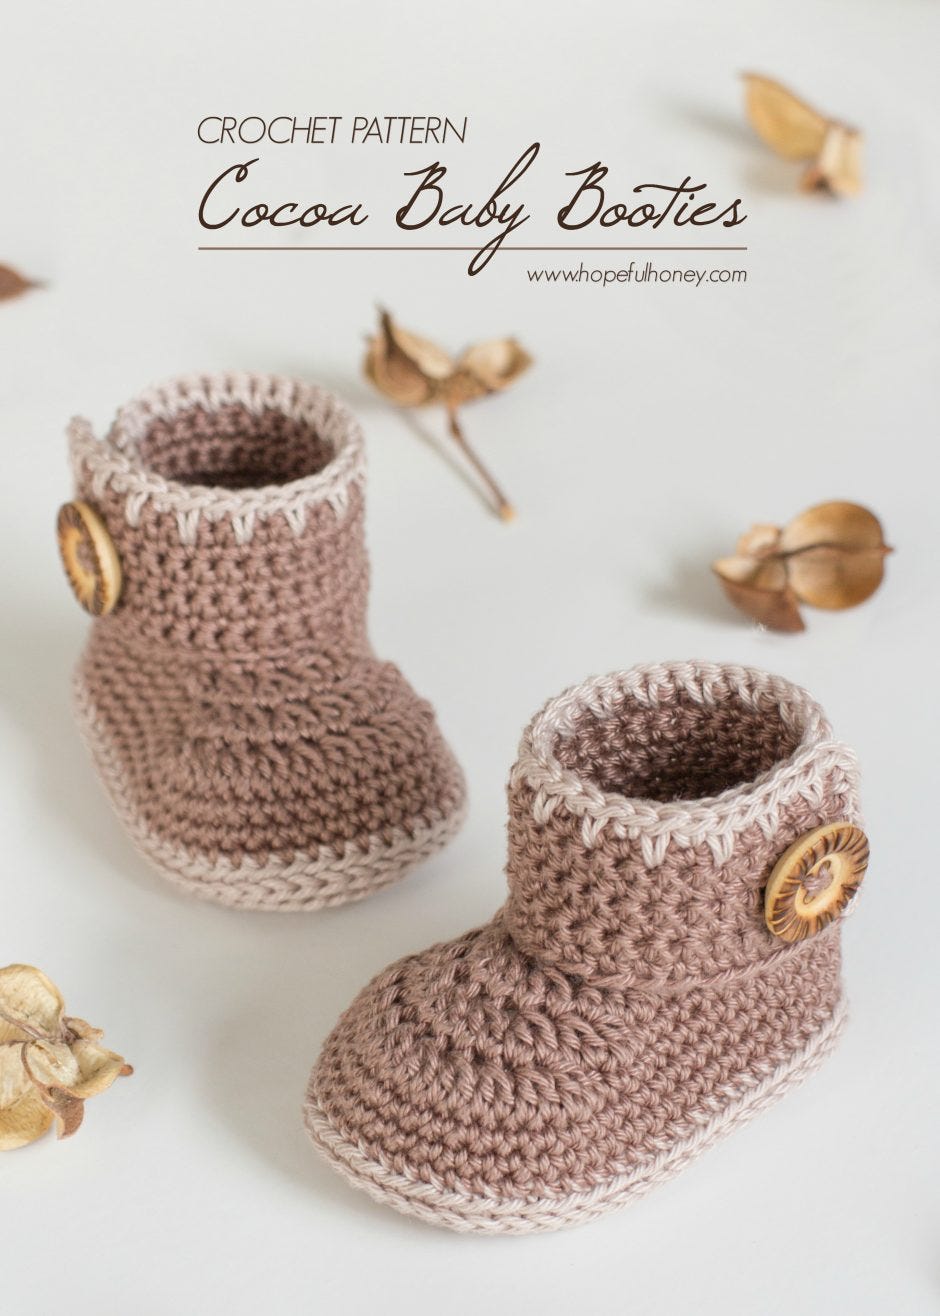 Cocoa-Baby-Ankle-Booties-Crochet-Pattern-6-940x1316.jpg (940×1316)